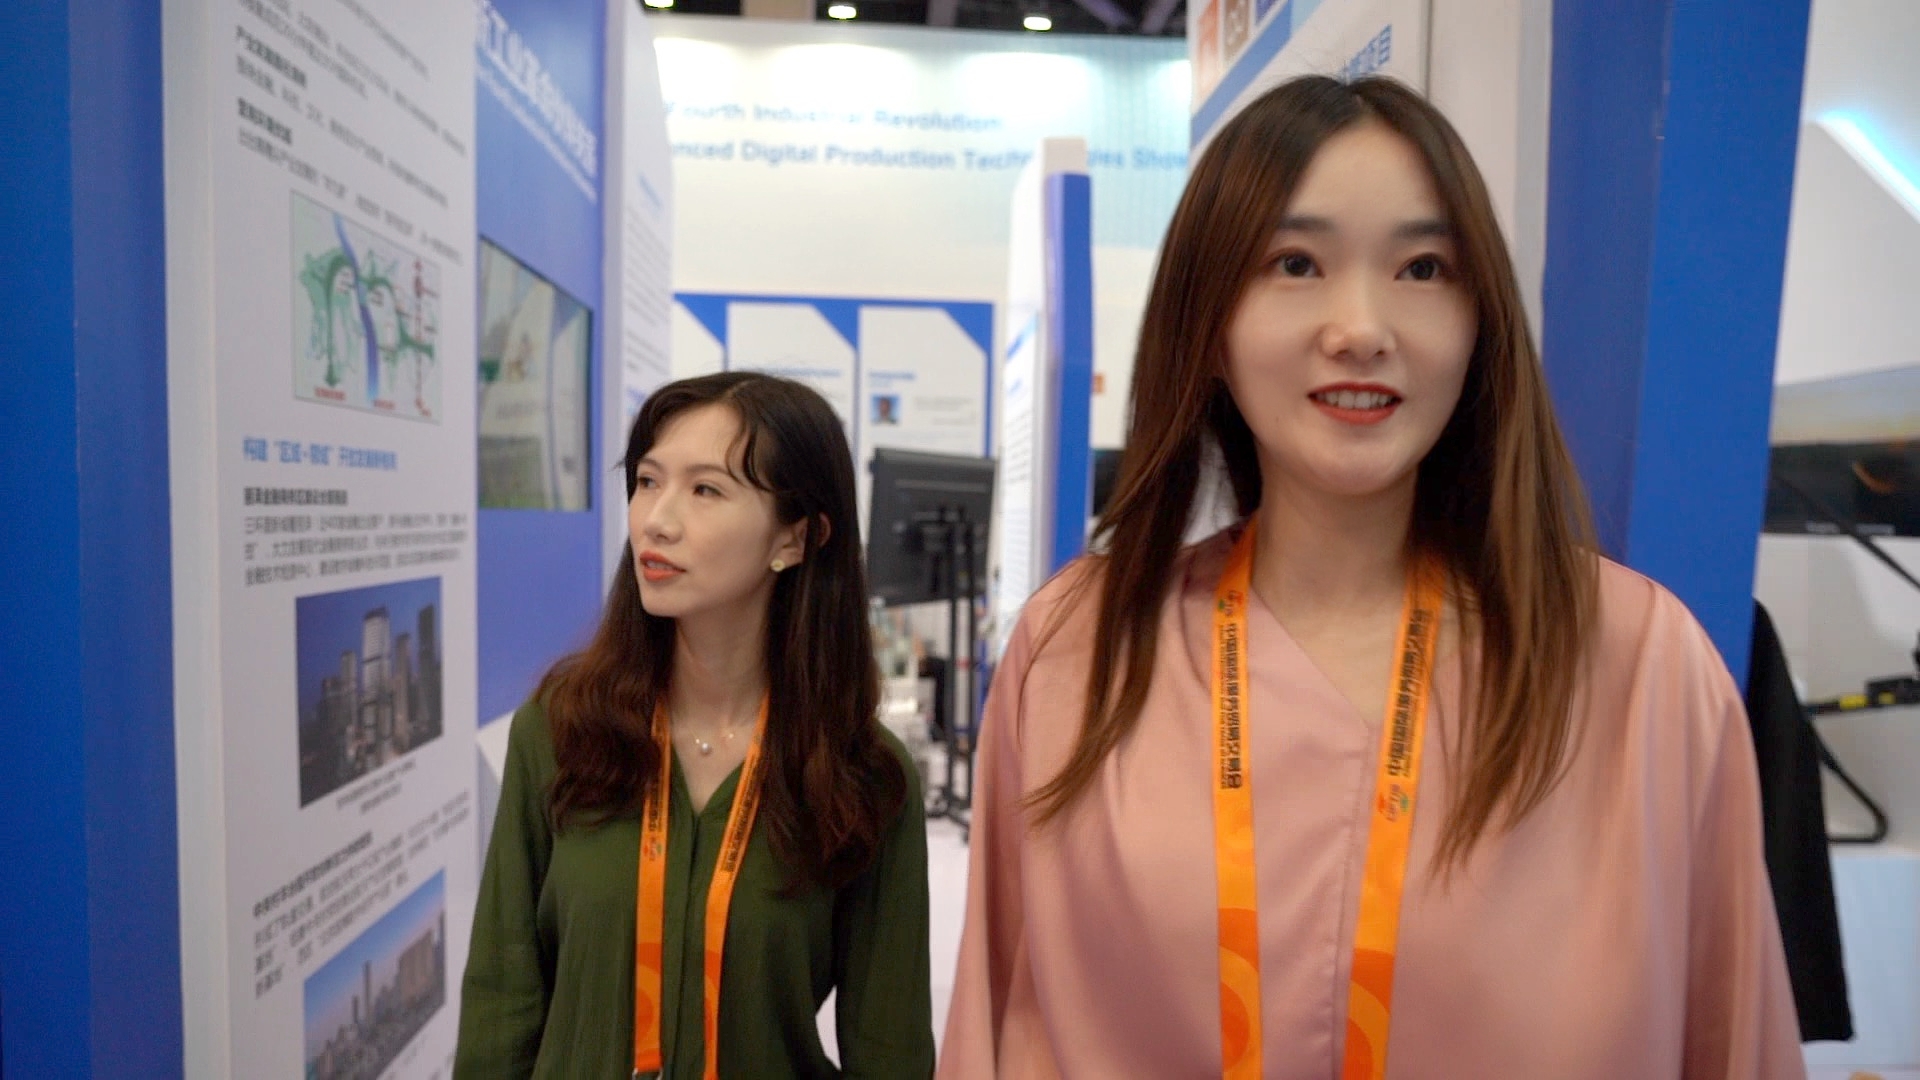 GLOBALink | Vlog: Dance to charge your phone at China's services trade fair